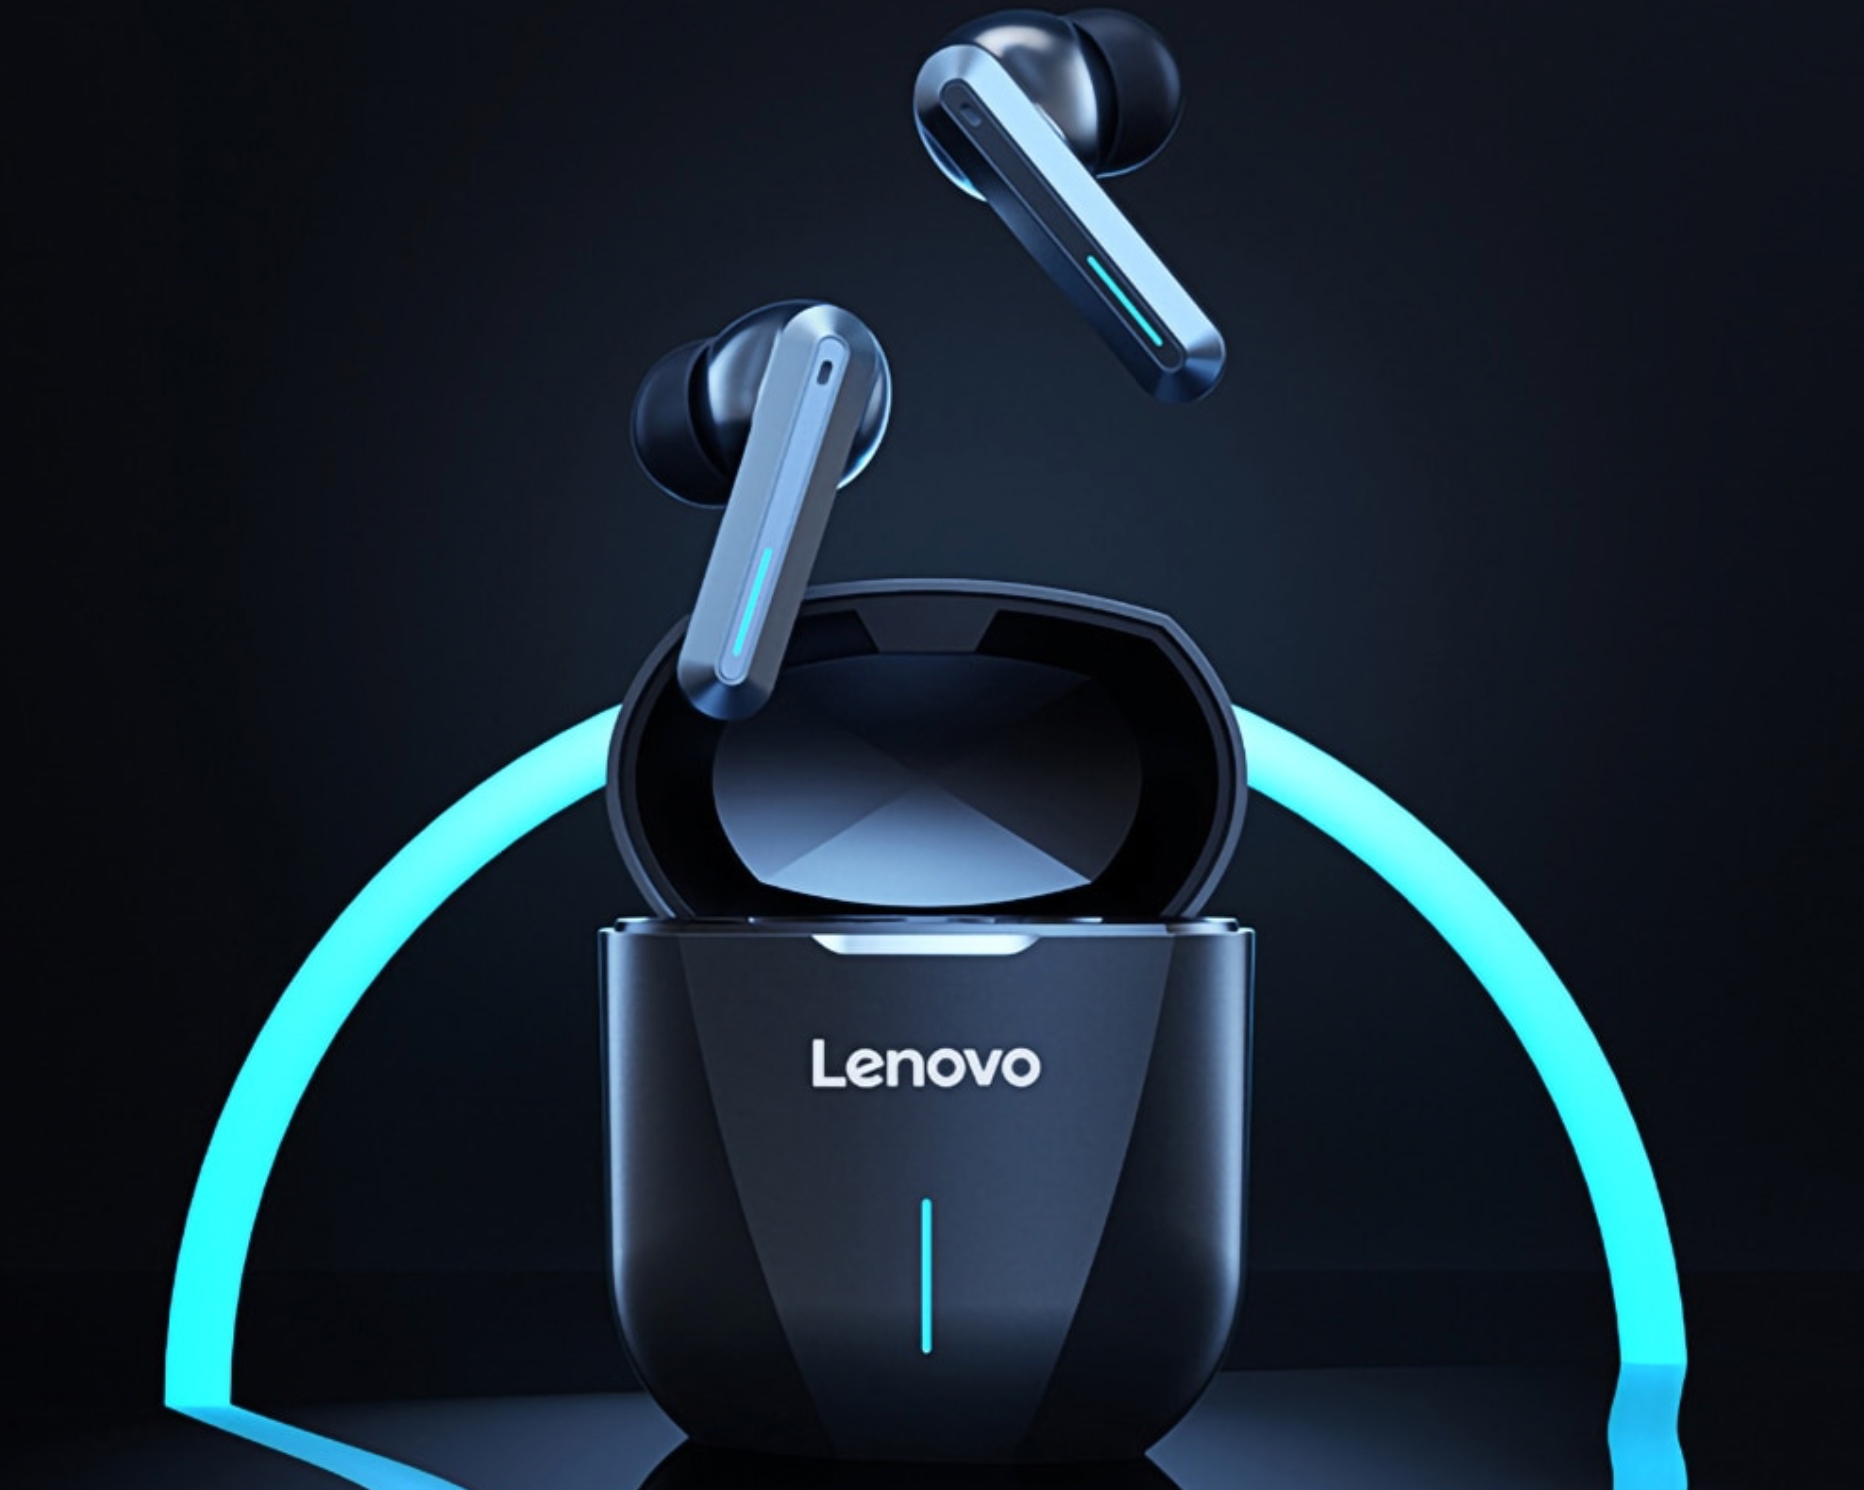 Lenovo XG01: TWS gaming headphones with low audio latency and IPX5 protection for $21